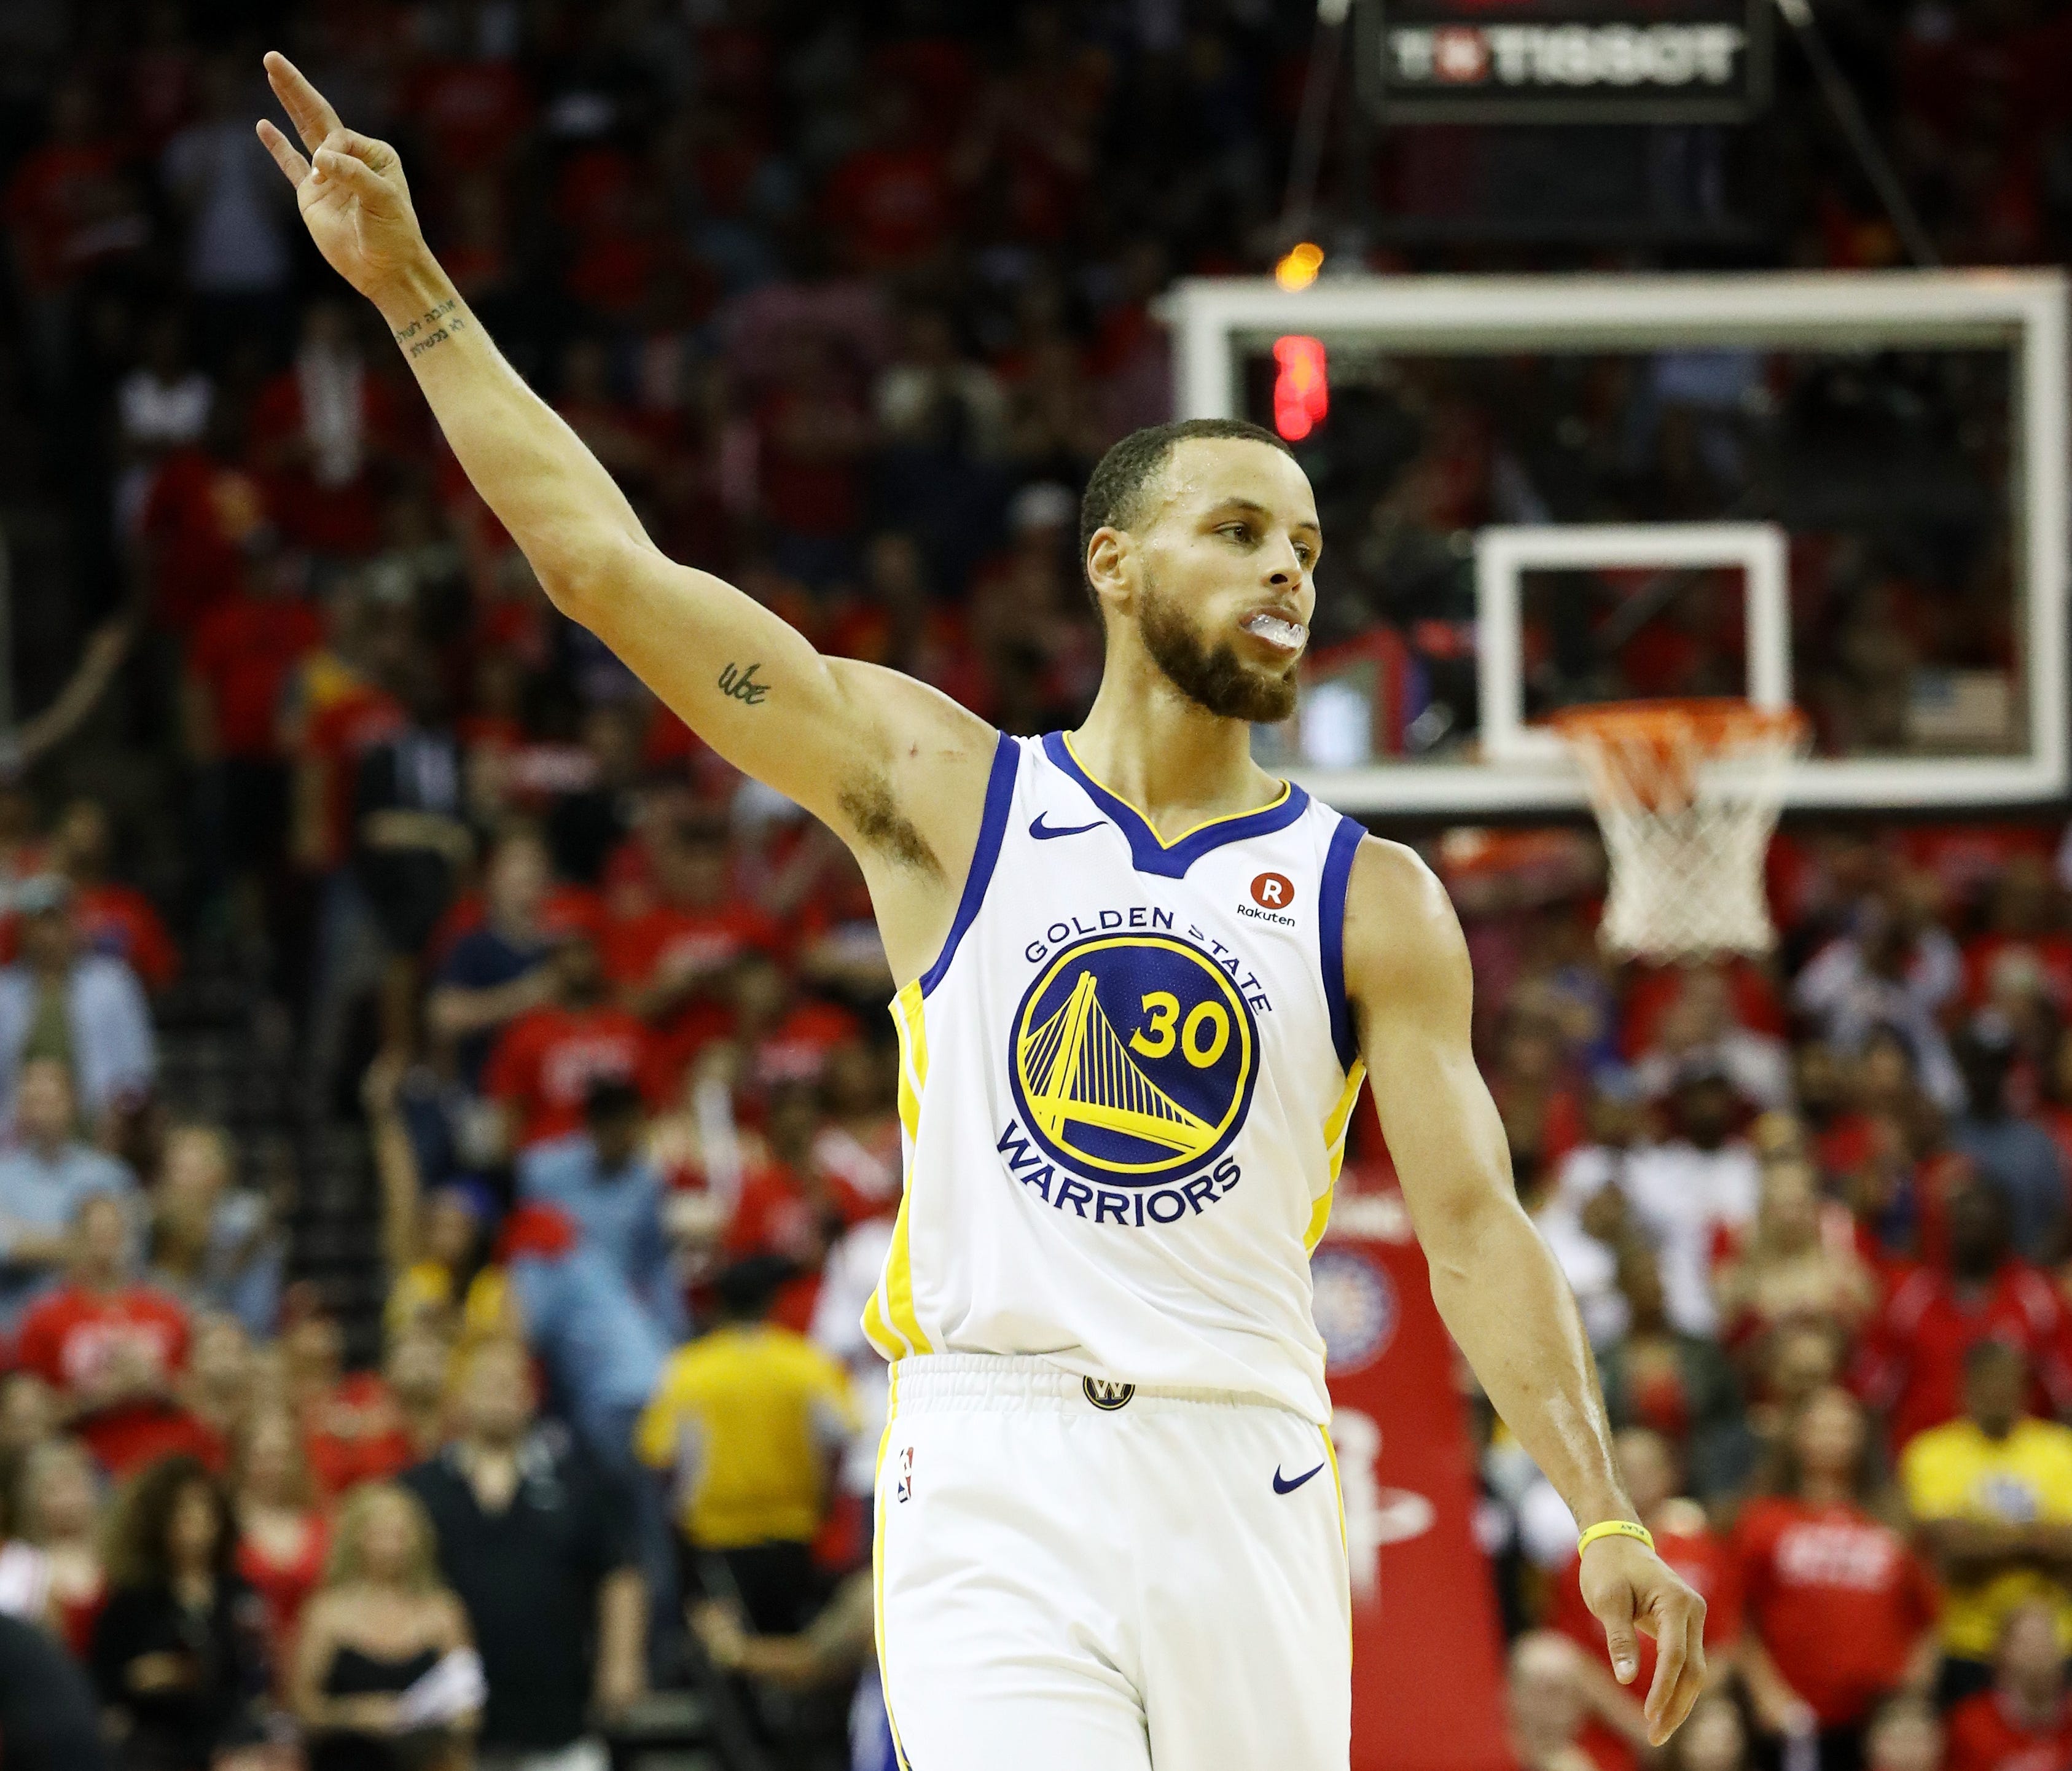 Stephen Curry of the Golden State Warriors celebrates a three-pointer in the third quarter of Game 7.